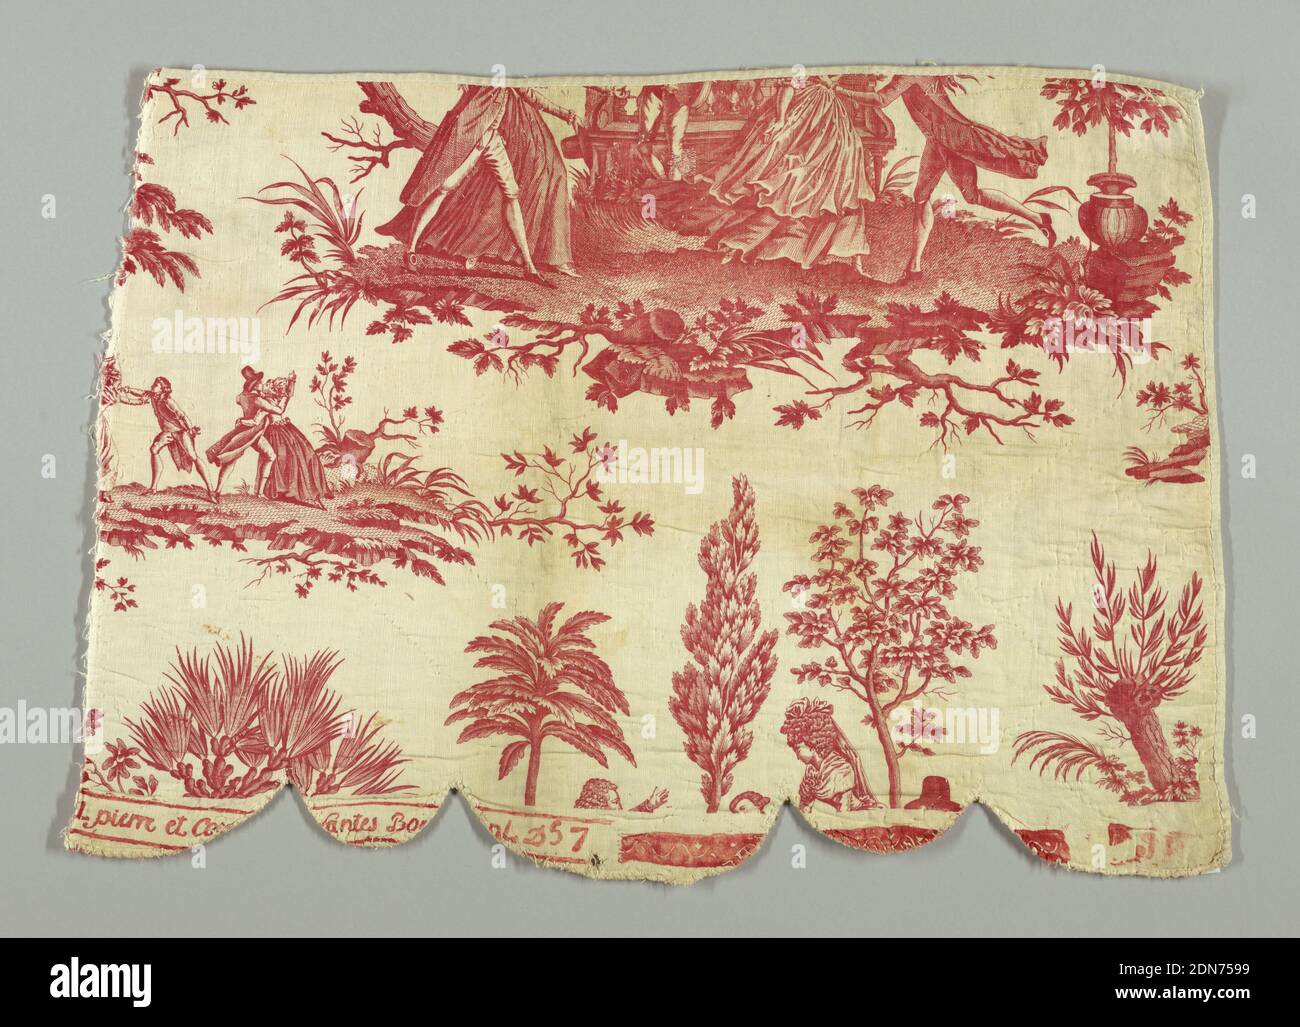 La Demande en Marriage, Medium: cotton Technique: printed by engraved copper plate on plain weave, Design in red on white ground showing parts of several vignettes., Nantes, France, ca. 1795, printed, dyed & painted textiles, Chef de piece, Chef de piece Stock Photo